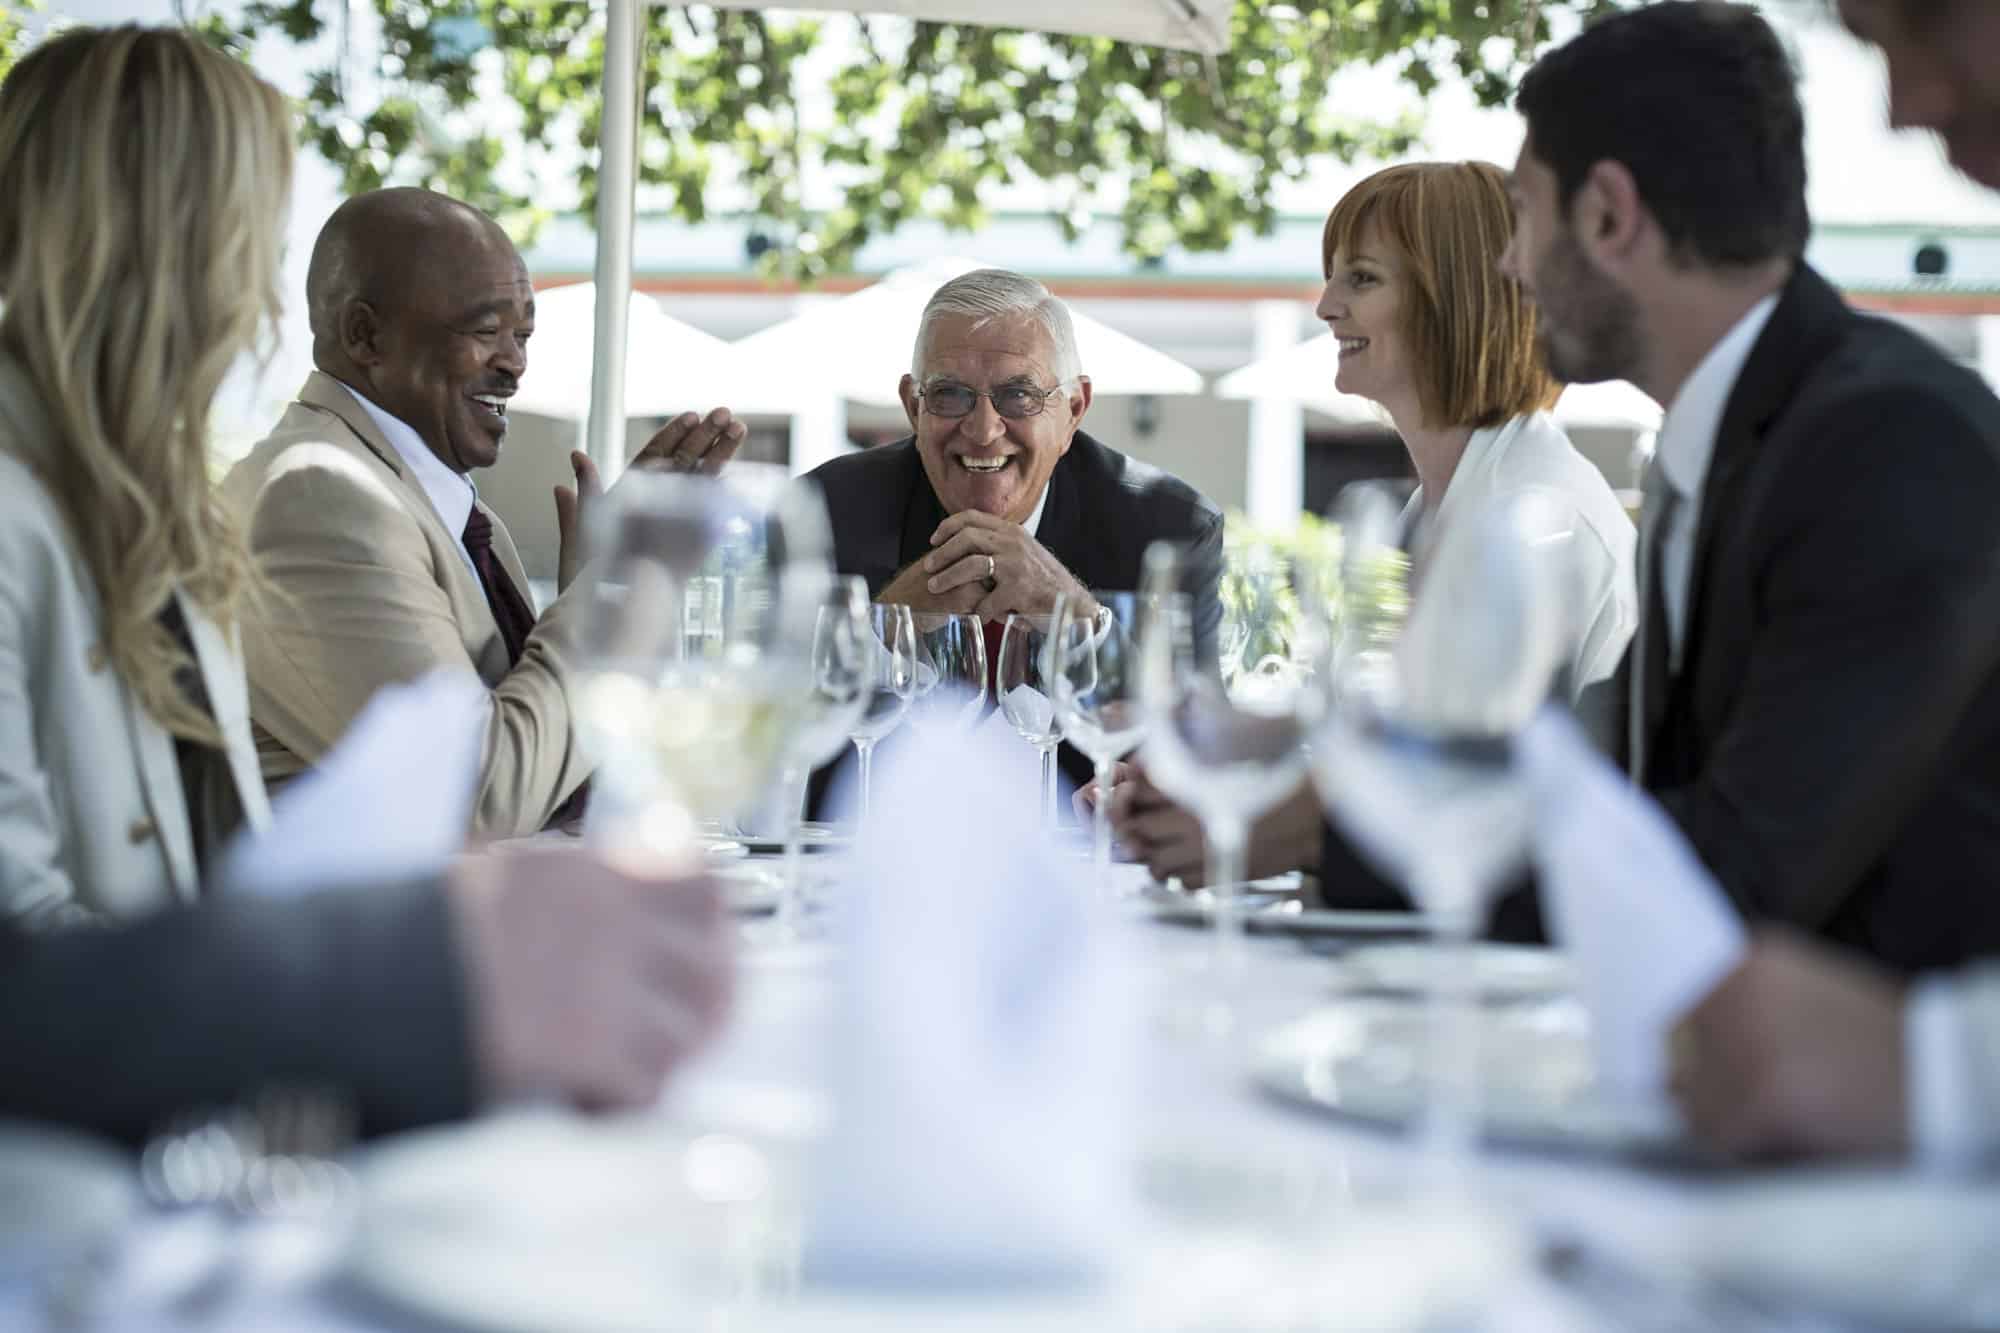 Business people having business lunch in restaurant, three men and two women seated at the table laughing together